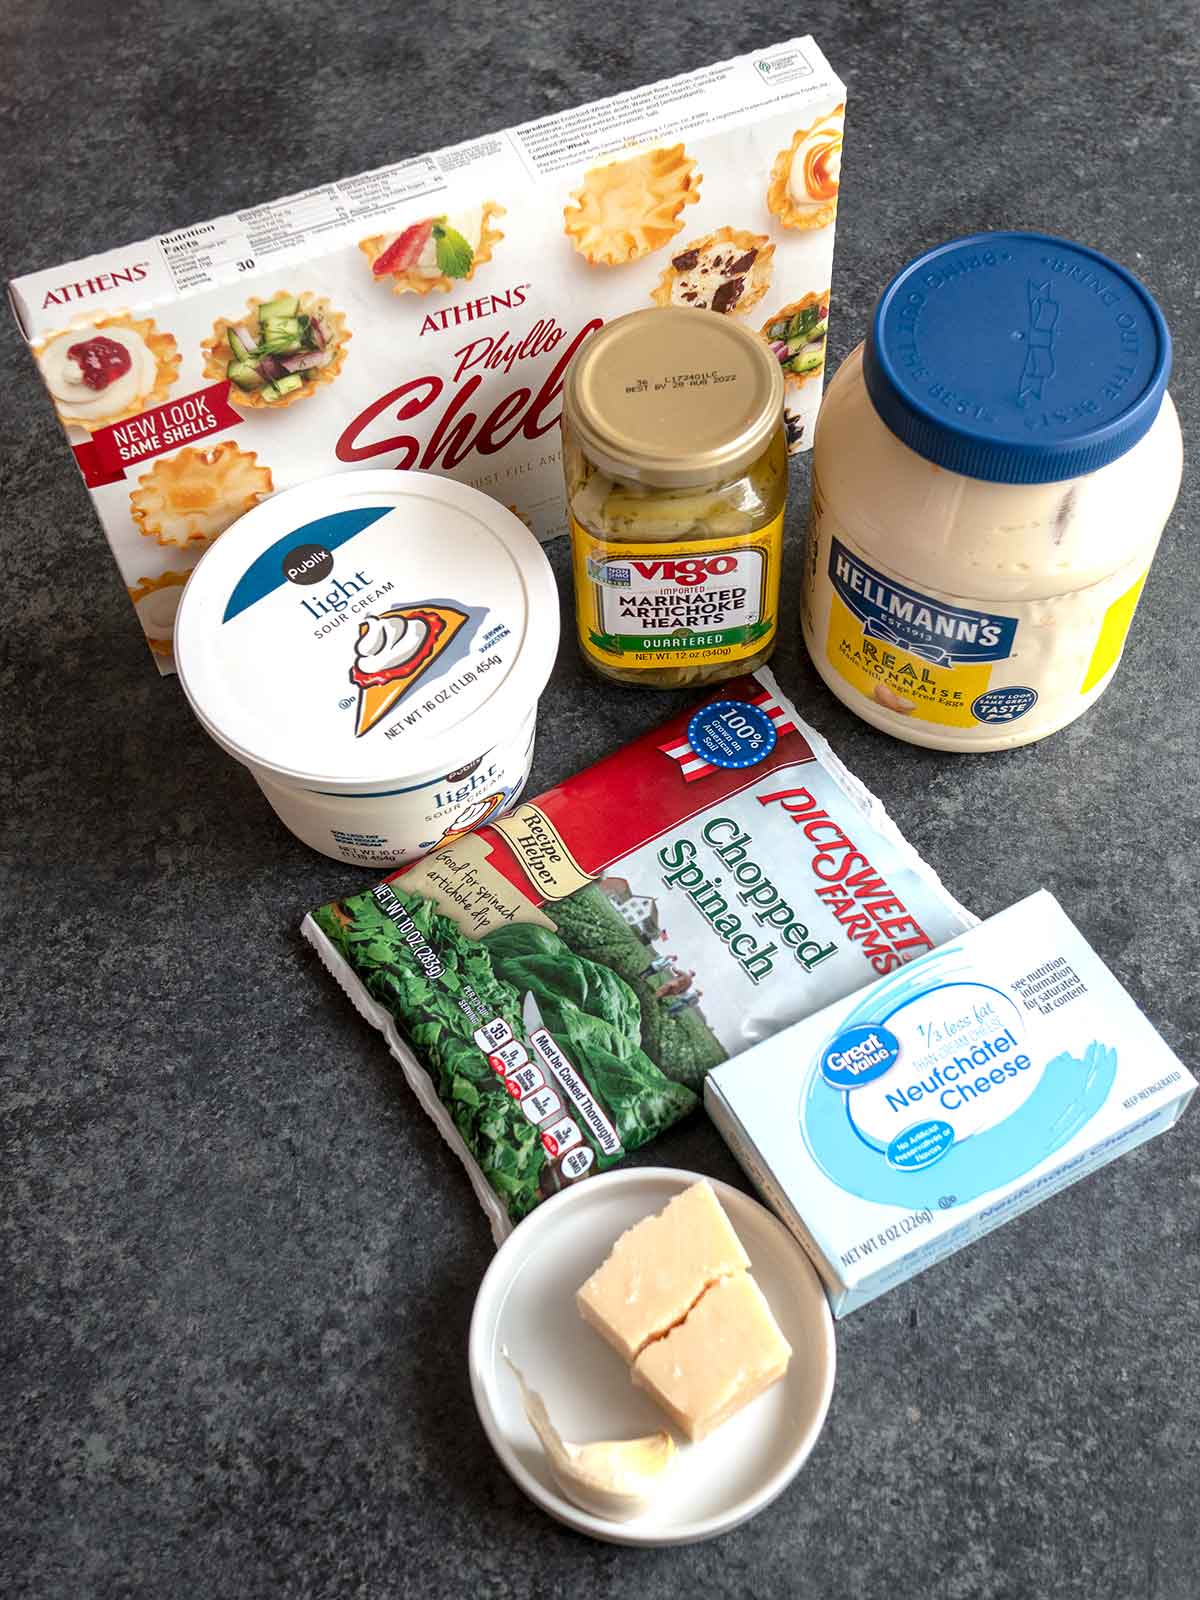 Ingredients for Spinach Artichoke Tartlets